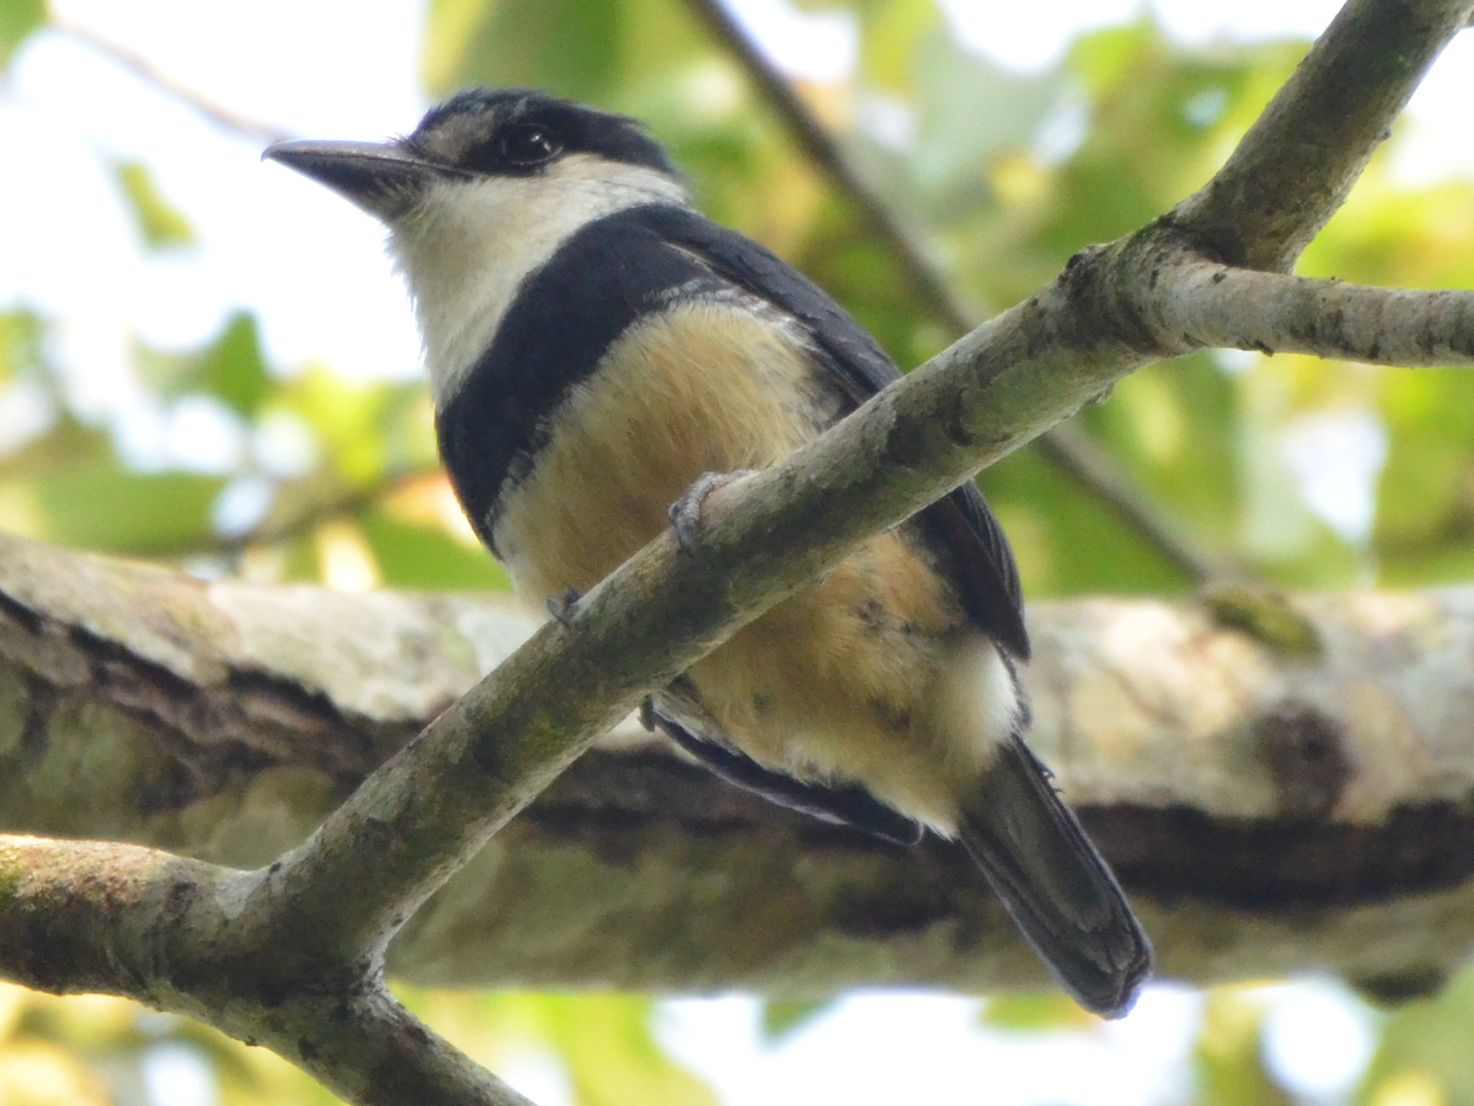 Click picture to see more  Buff-bellied Puffbird.